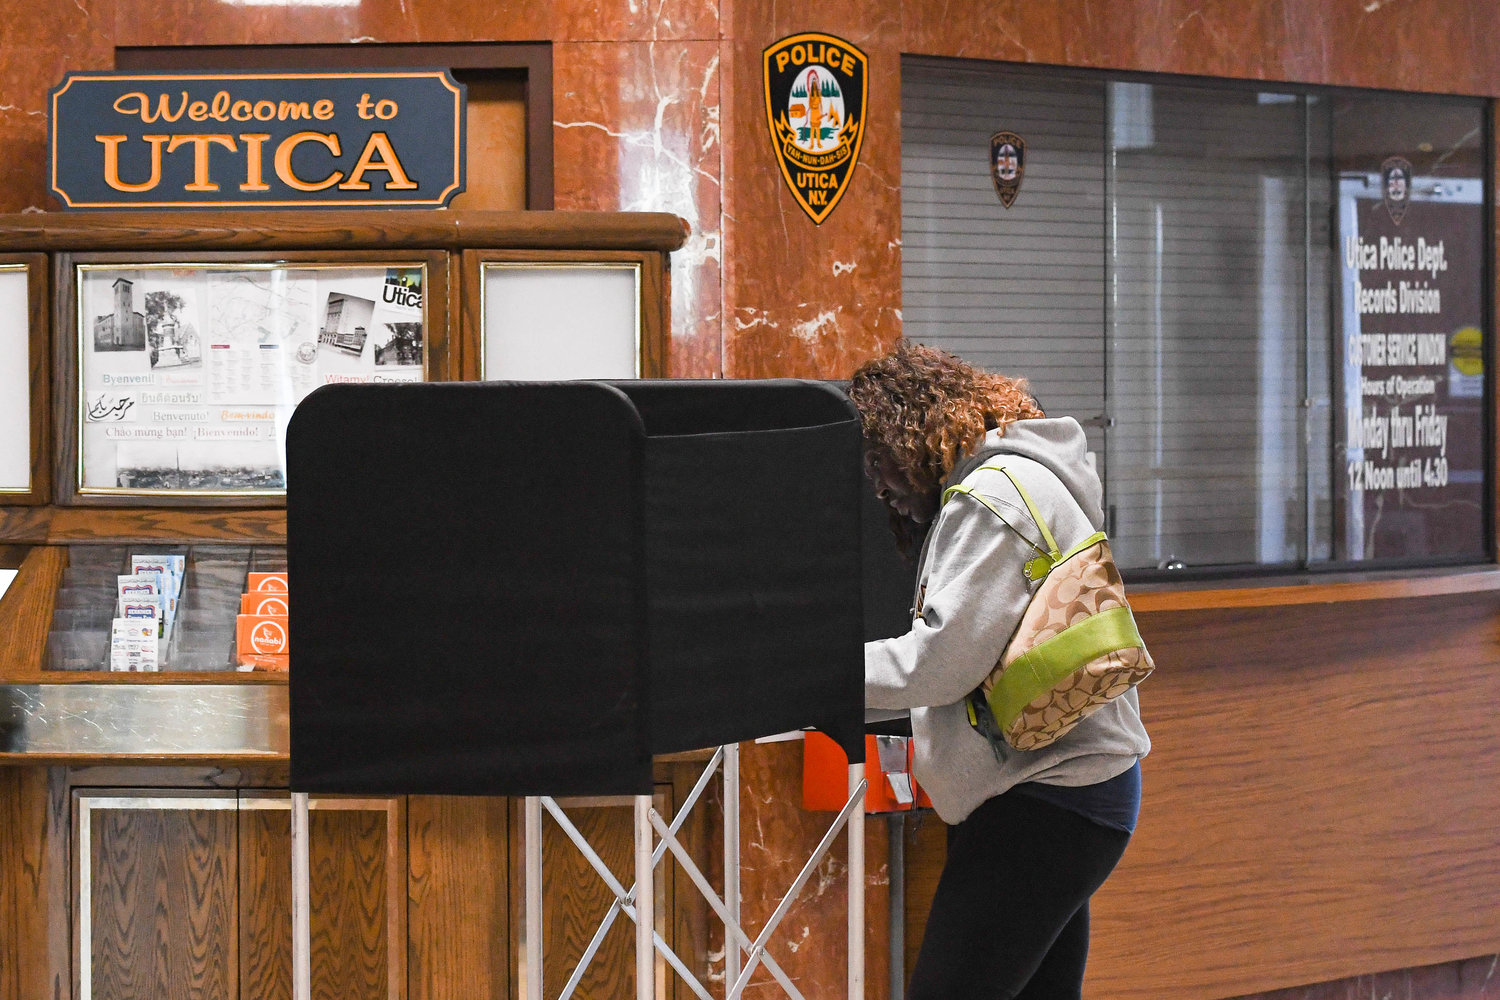 A woman fills out her ballot at Utica City Hall on Tuesday, Nov. 8. Oneida County election commissioners reported a busy day at the polls, with some 4,500 to 4,700 voters each hour going to cast their ballots across the county.